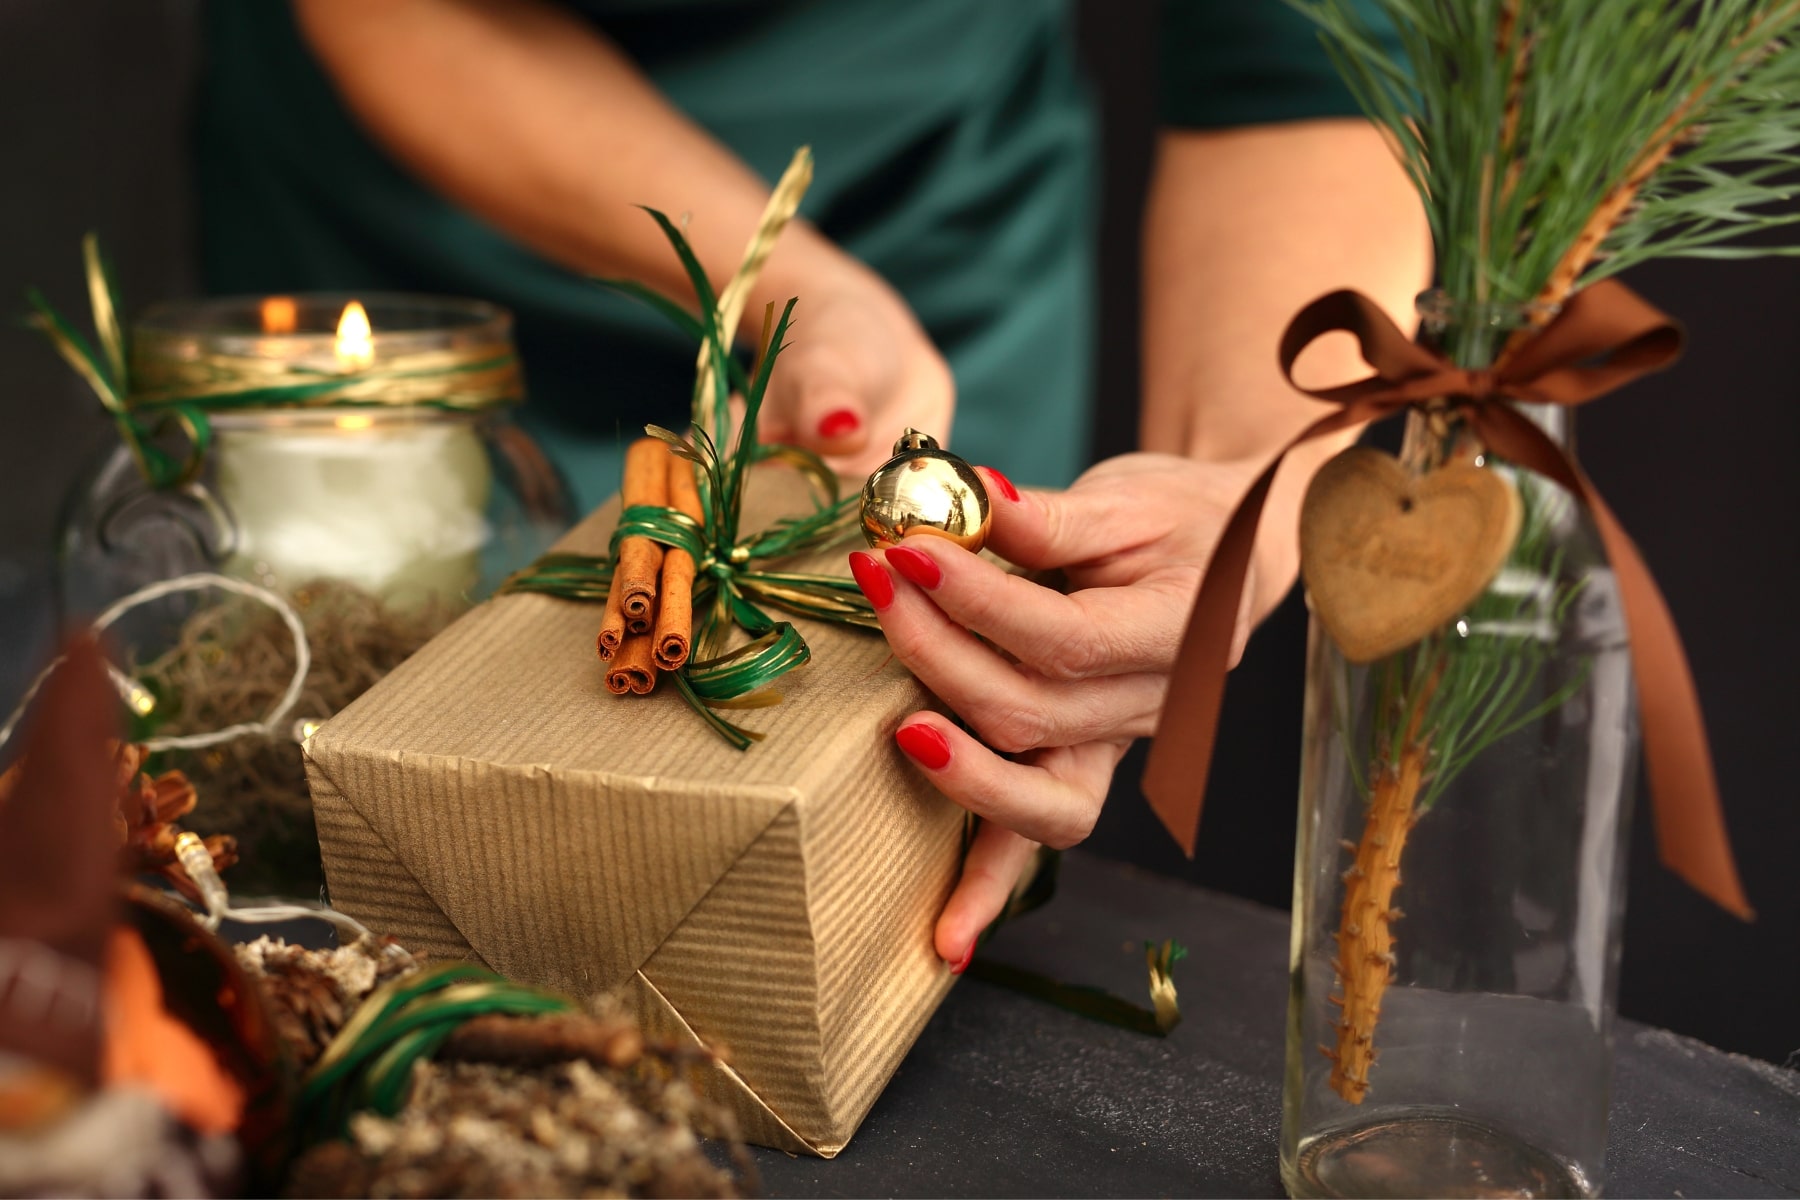 Featured image for “Holiday Gift Guide For The Hostess”